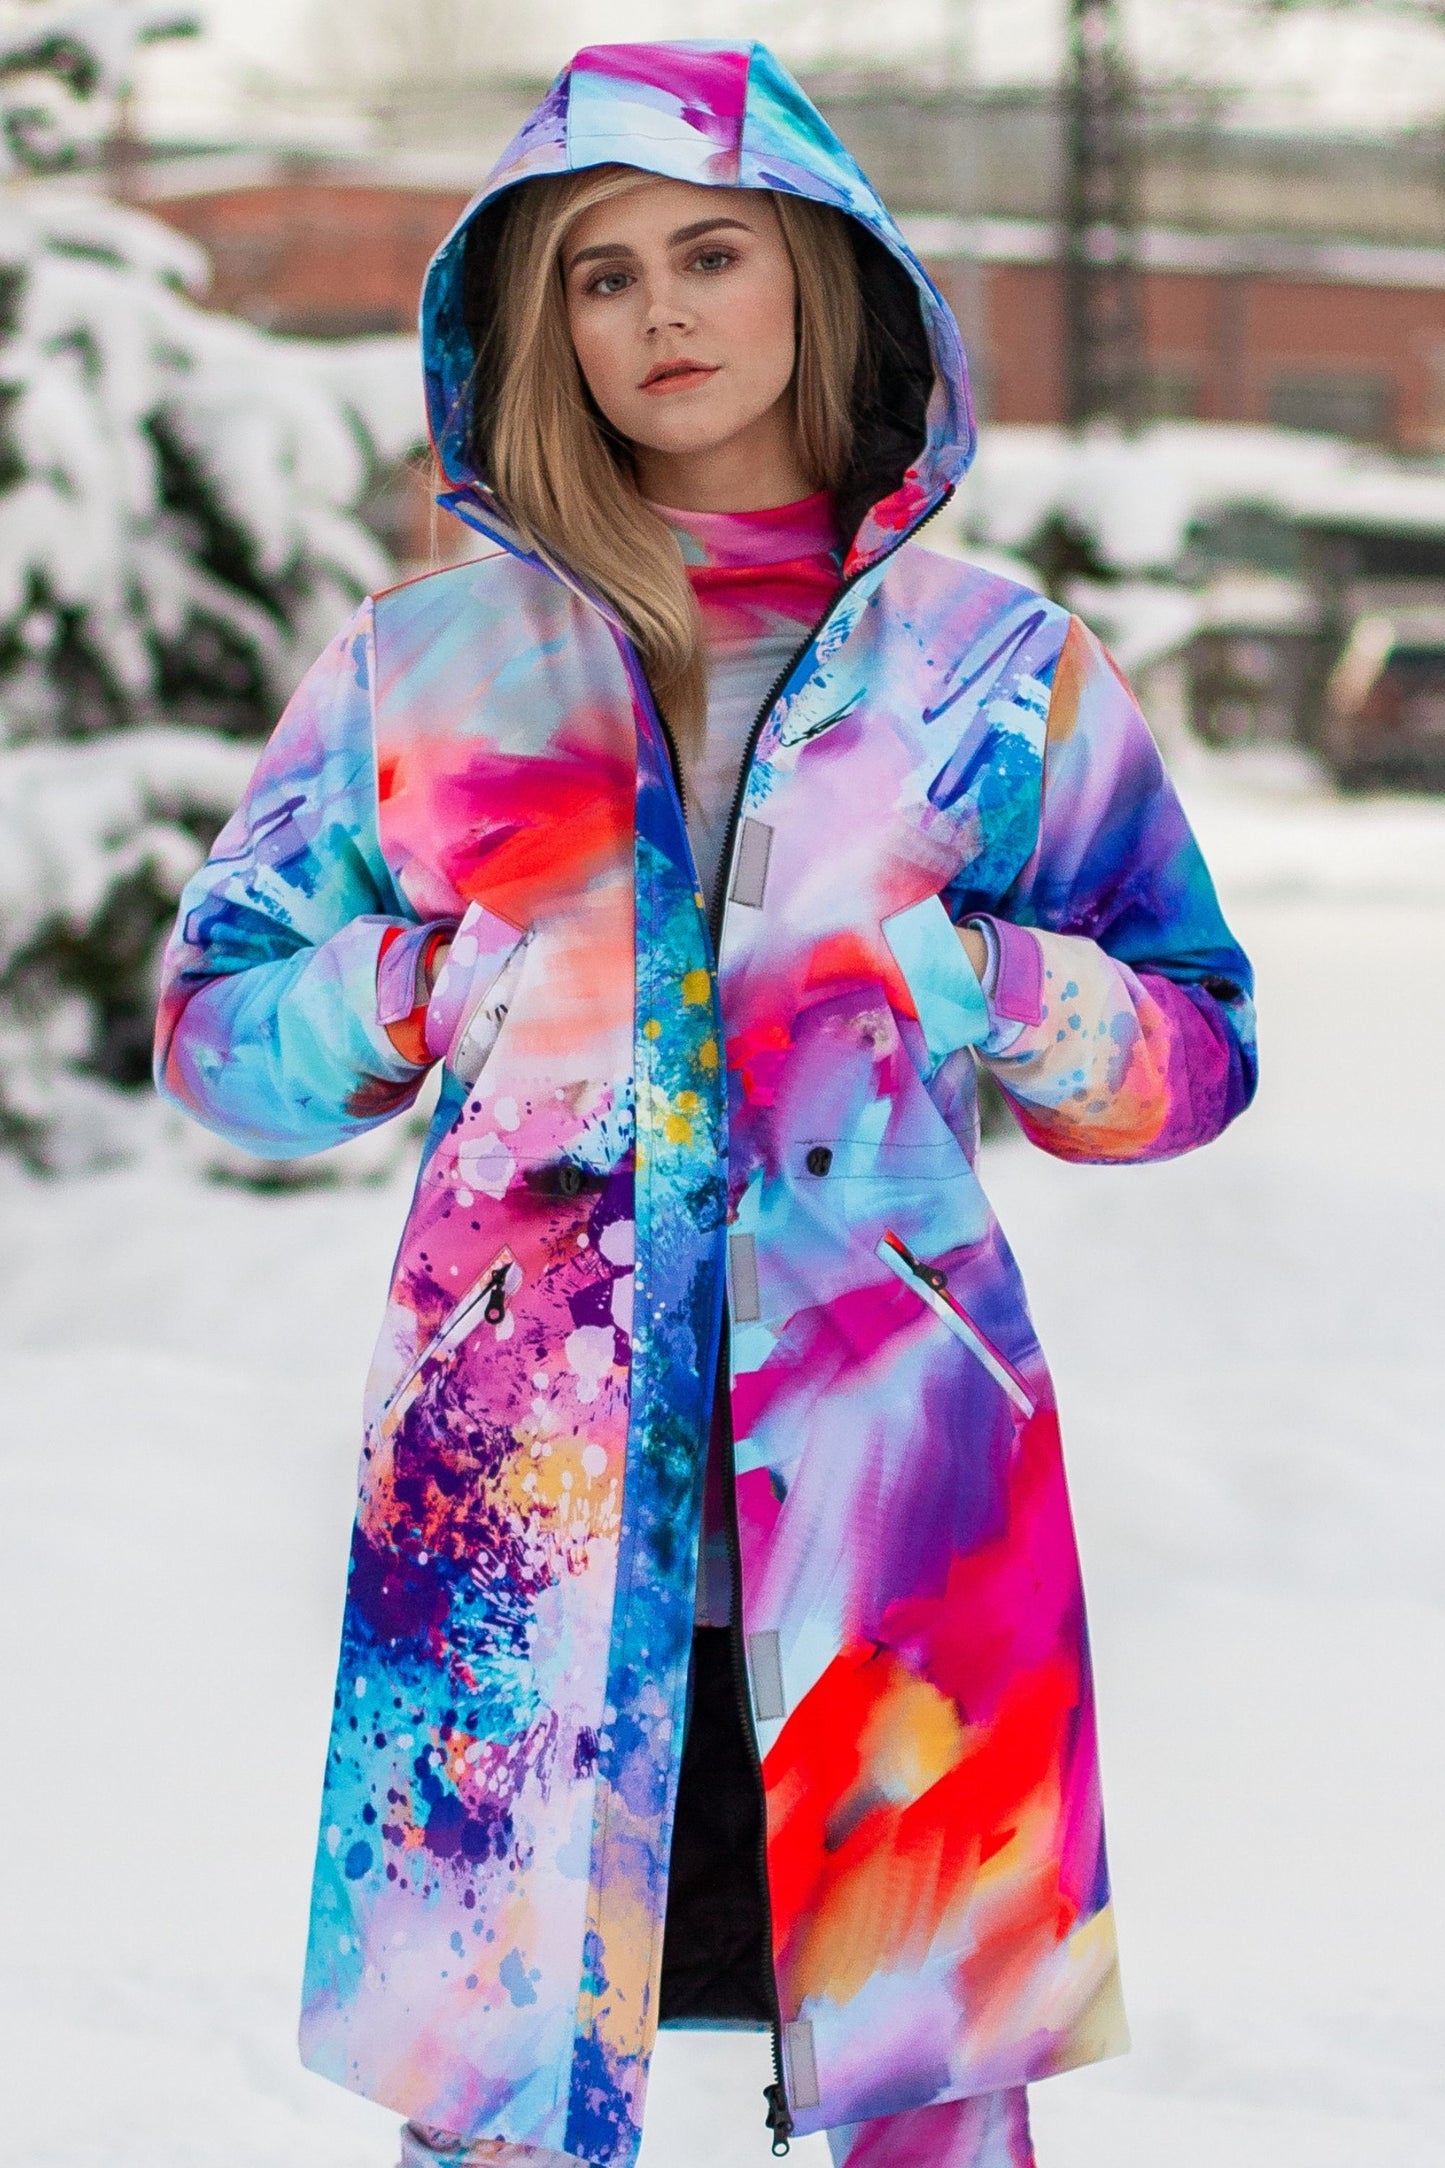 Softshell coat / parka with lighter colorful tones